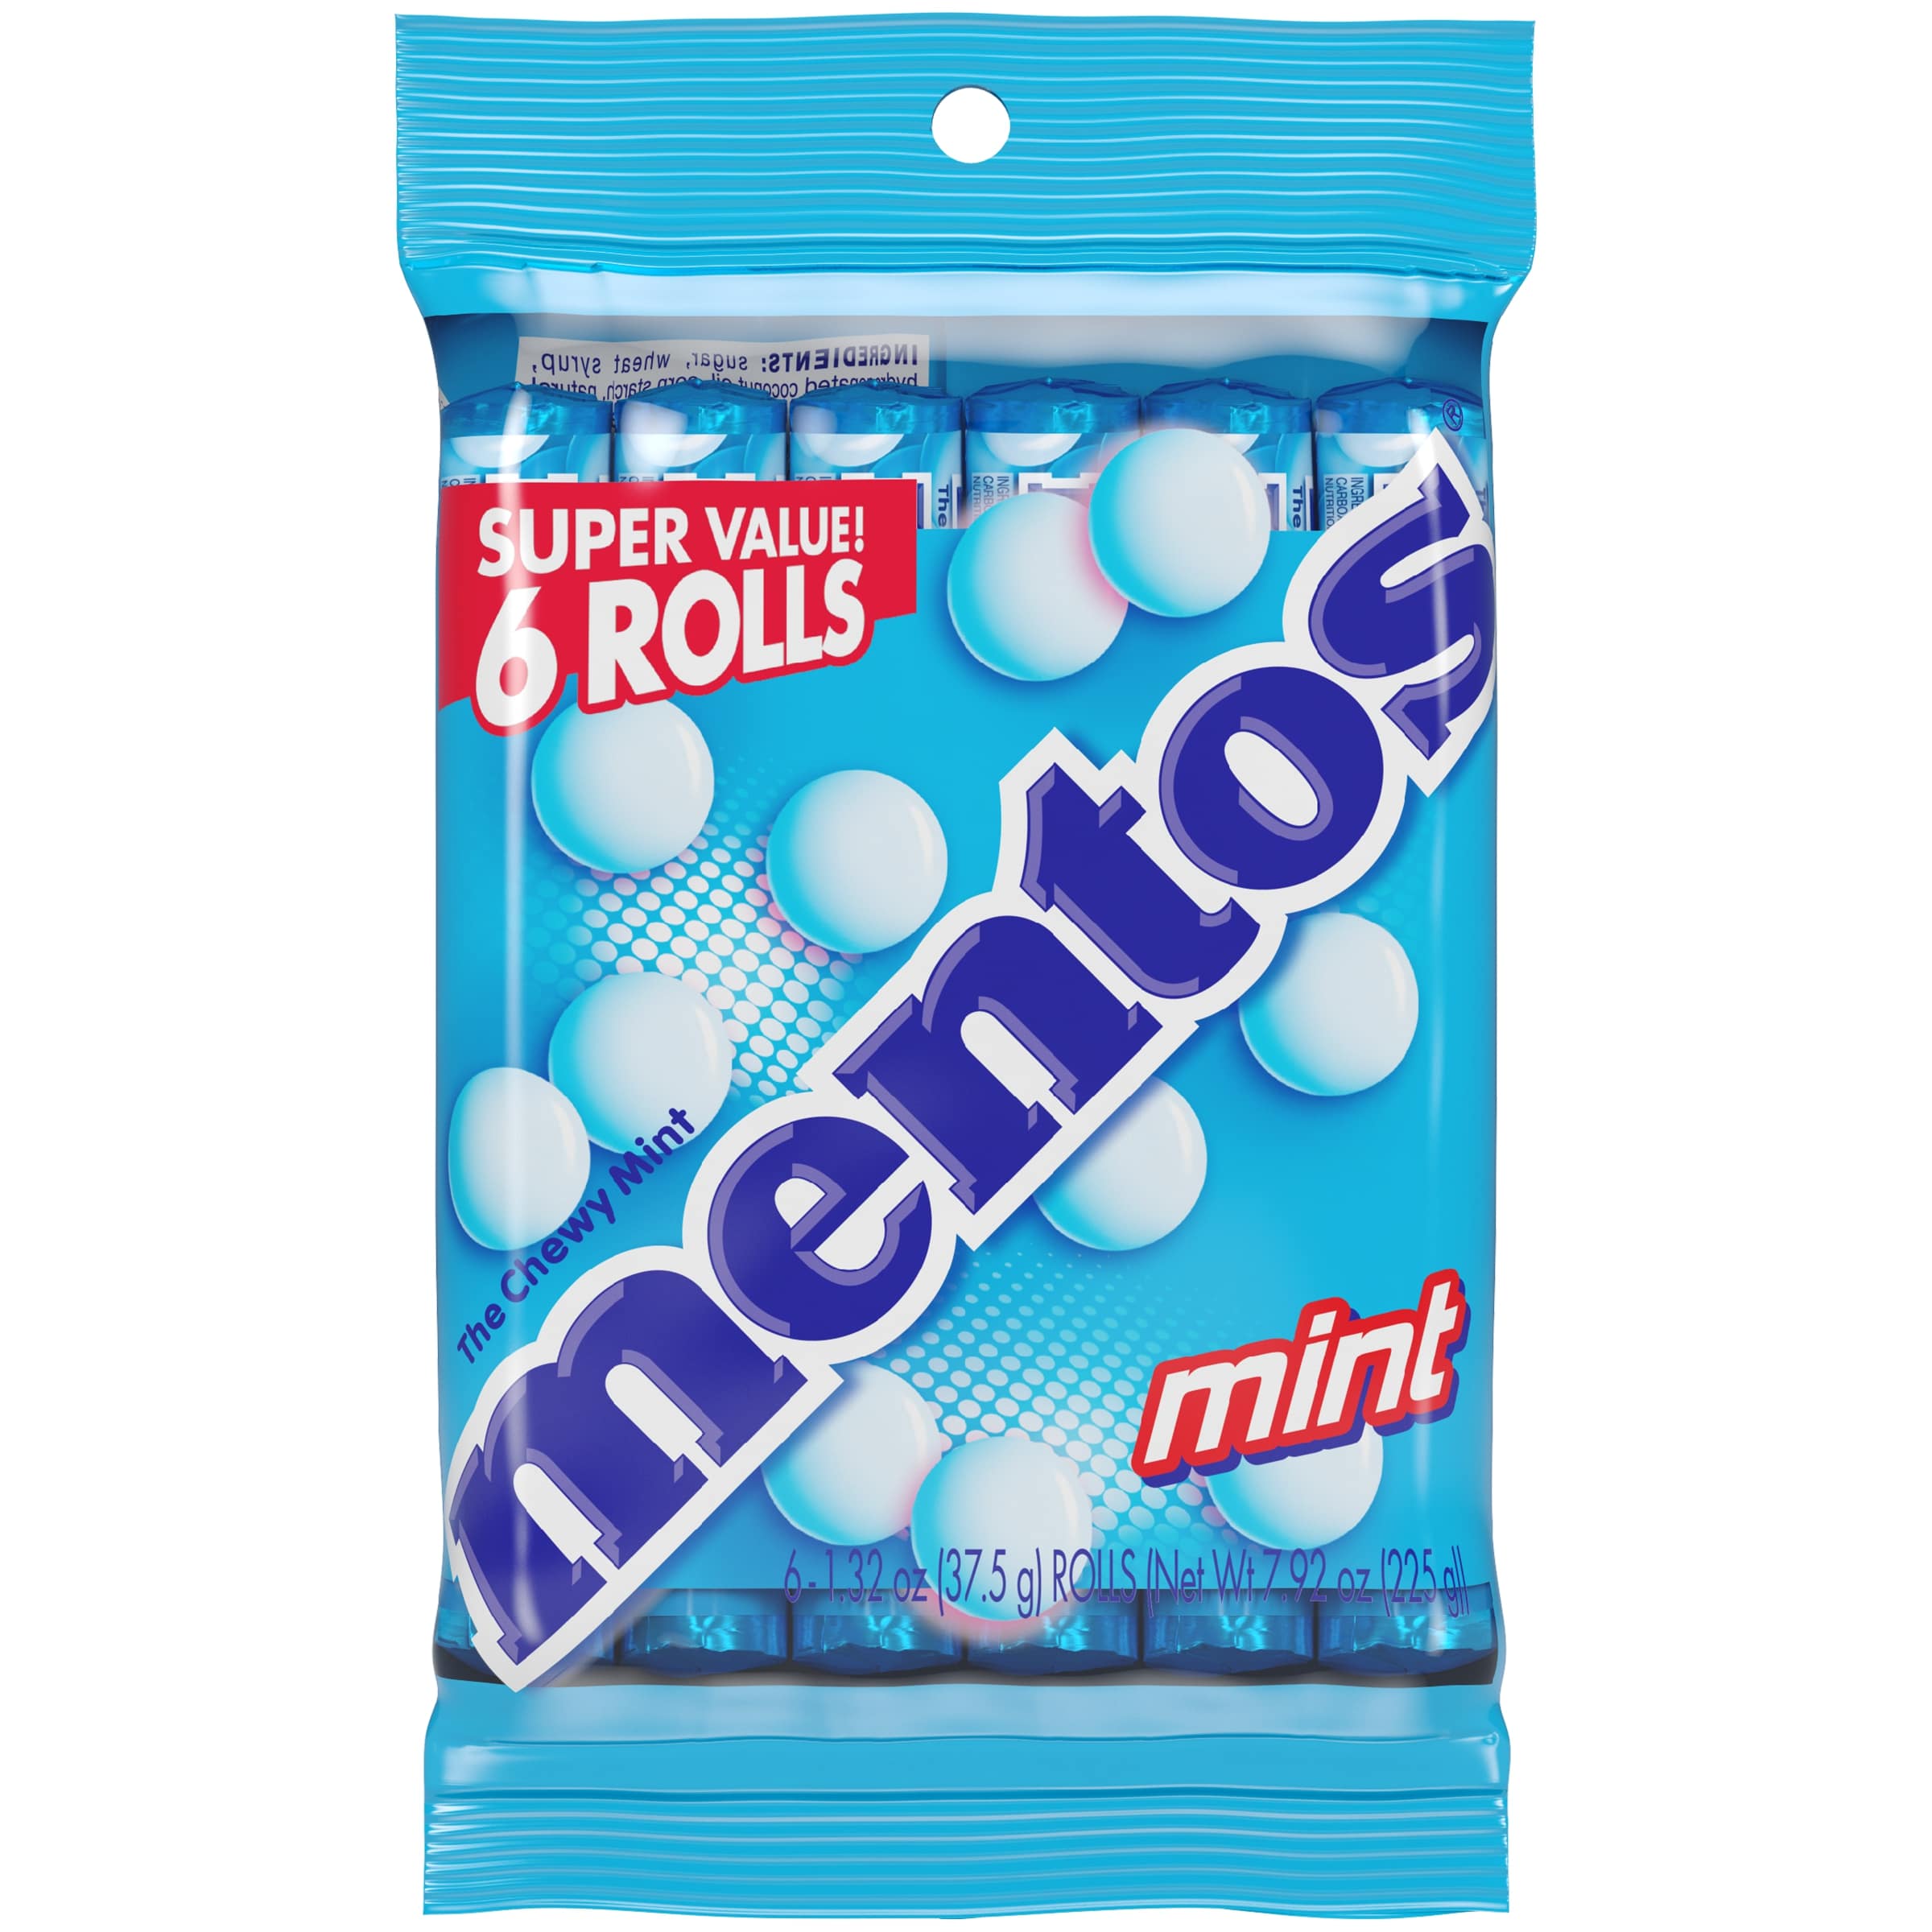 Mentos Chewy Mint Candy Roll, Peppermint, Peanut Free, Regular Size, 1.32 oz, 6 Count - image 5 of 8